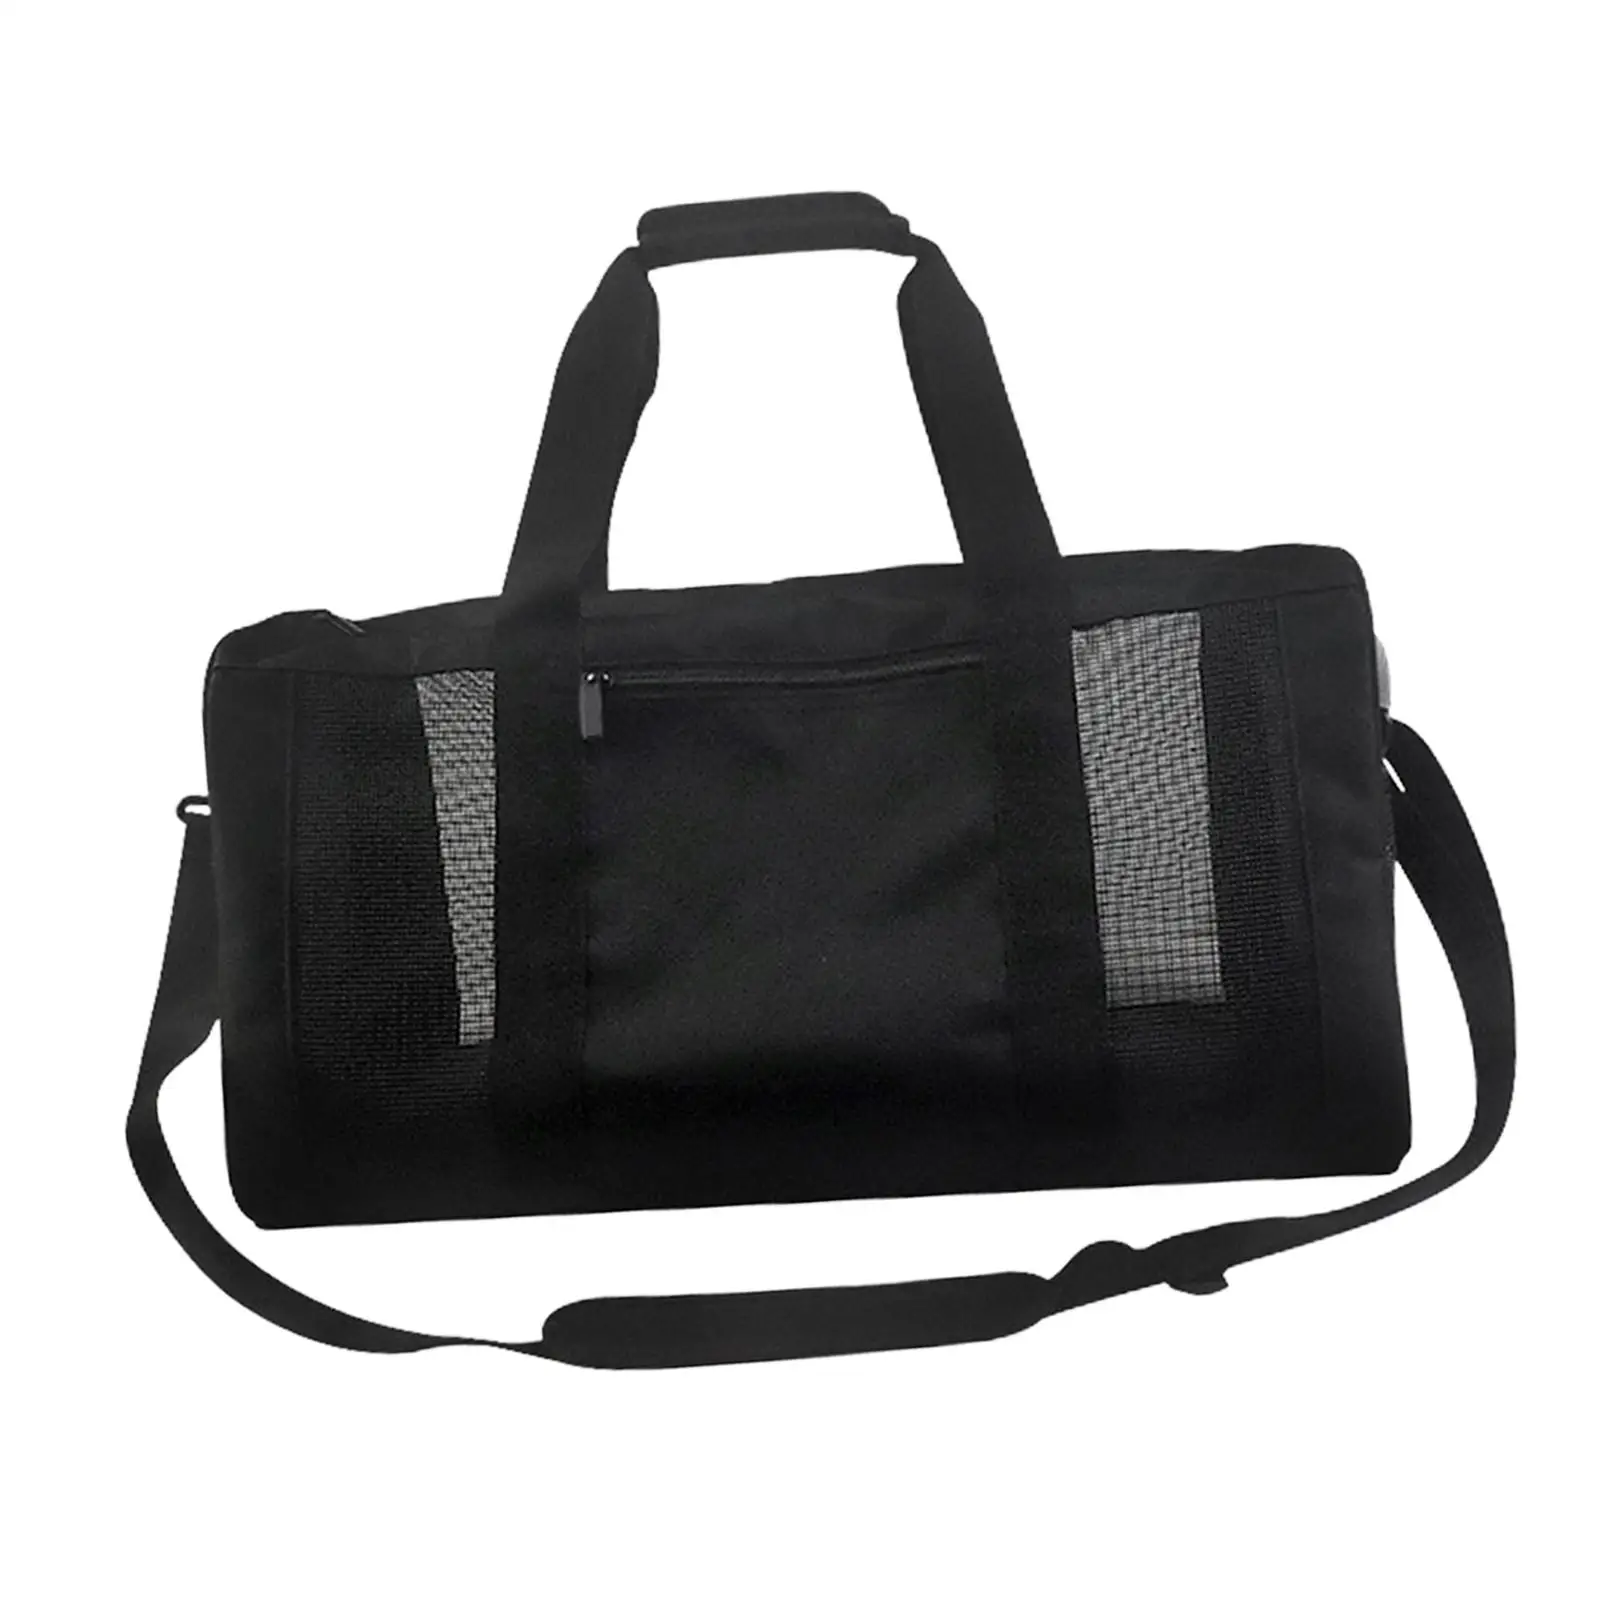 Mesh Gym Bag Cross Shoulder Travel Duffle Bag Overnight Weekender Bags Easy Dry Workout Gym Accessories Sports Bags Fitness Bag